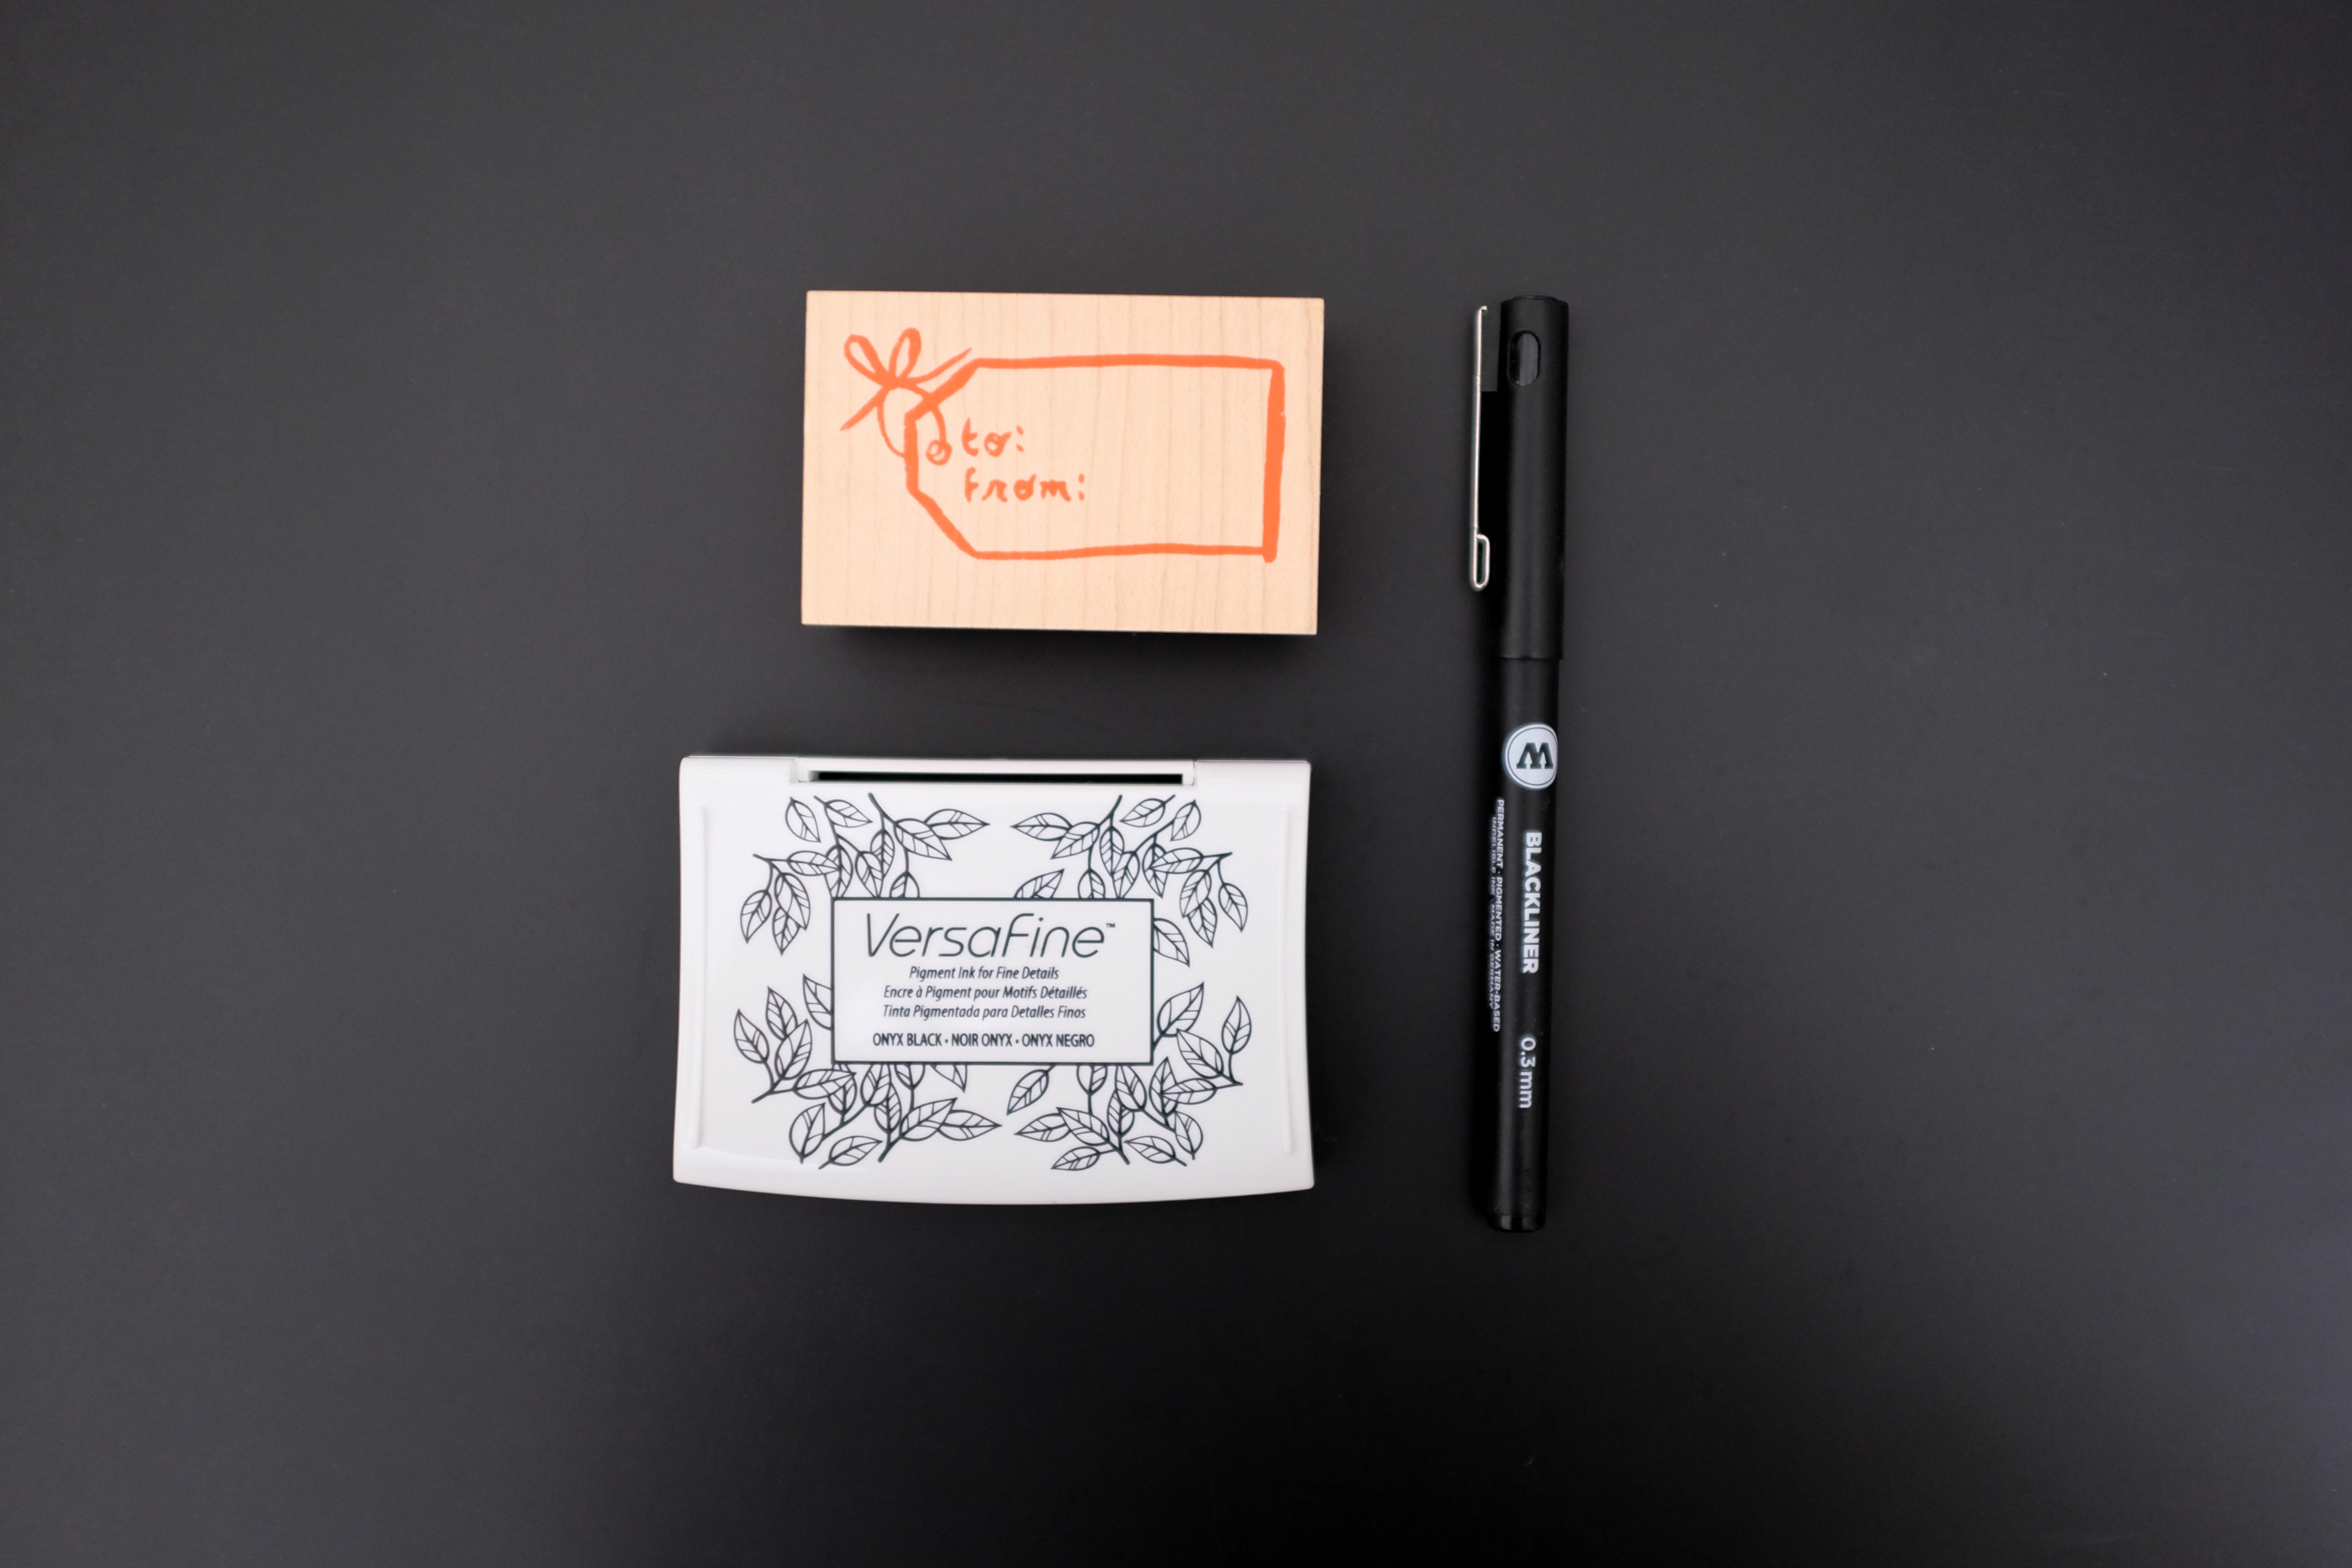 A stamp that reads "to, from", a stamp ink pad, and a pen on a black background